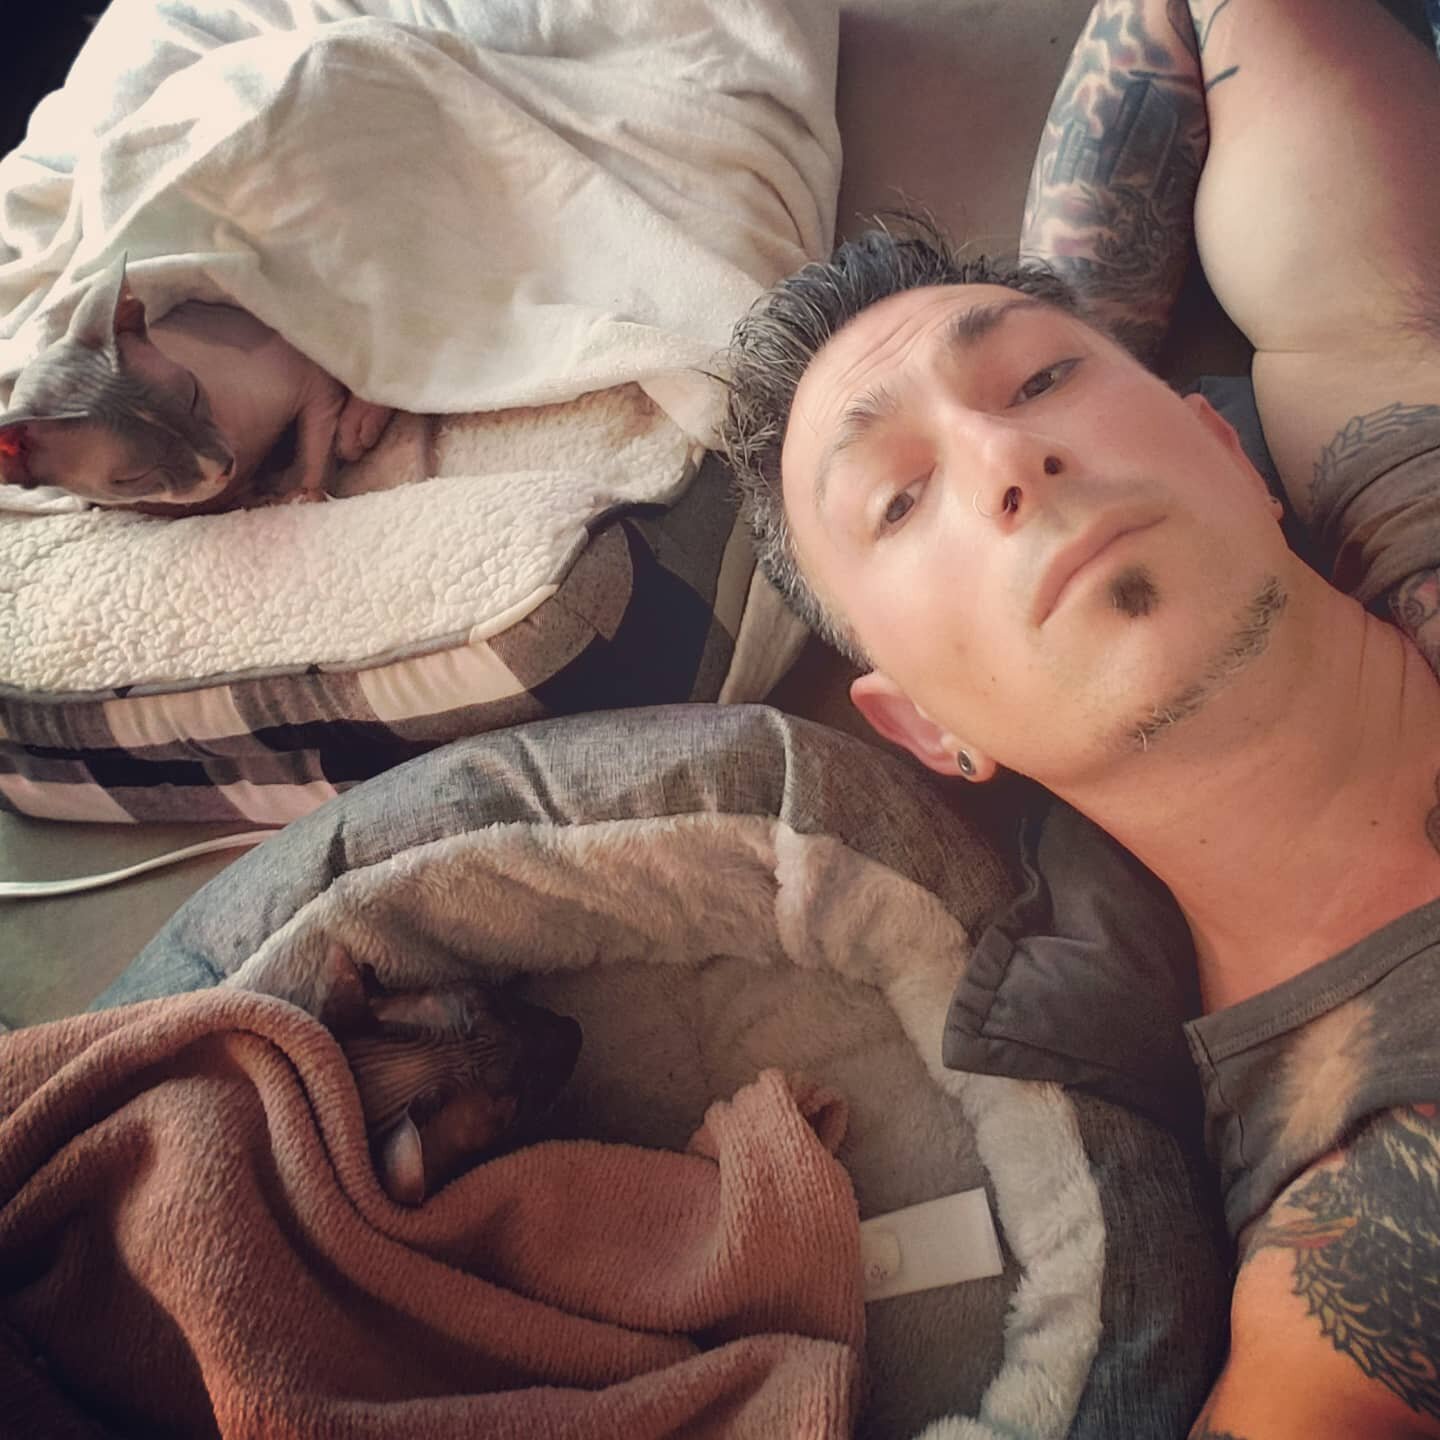 After being tucked in on their heated beds, it's time for a cat nap with our favorite Sphinx sons😸❤
#catsofjc #catsofjerseycity
#responsiblepetcare #catcare #catlovers #professionalpetcare #jerseycitycats #sphynxcat
#sphynx #sphynxcats #sphynxofinst